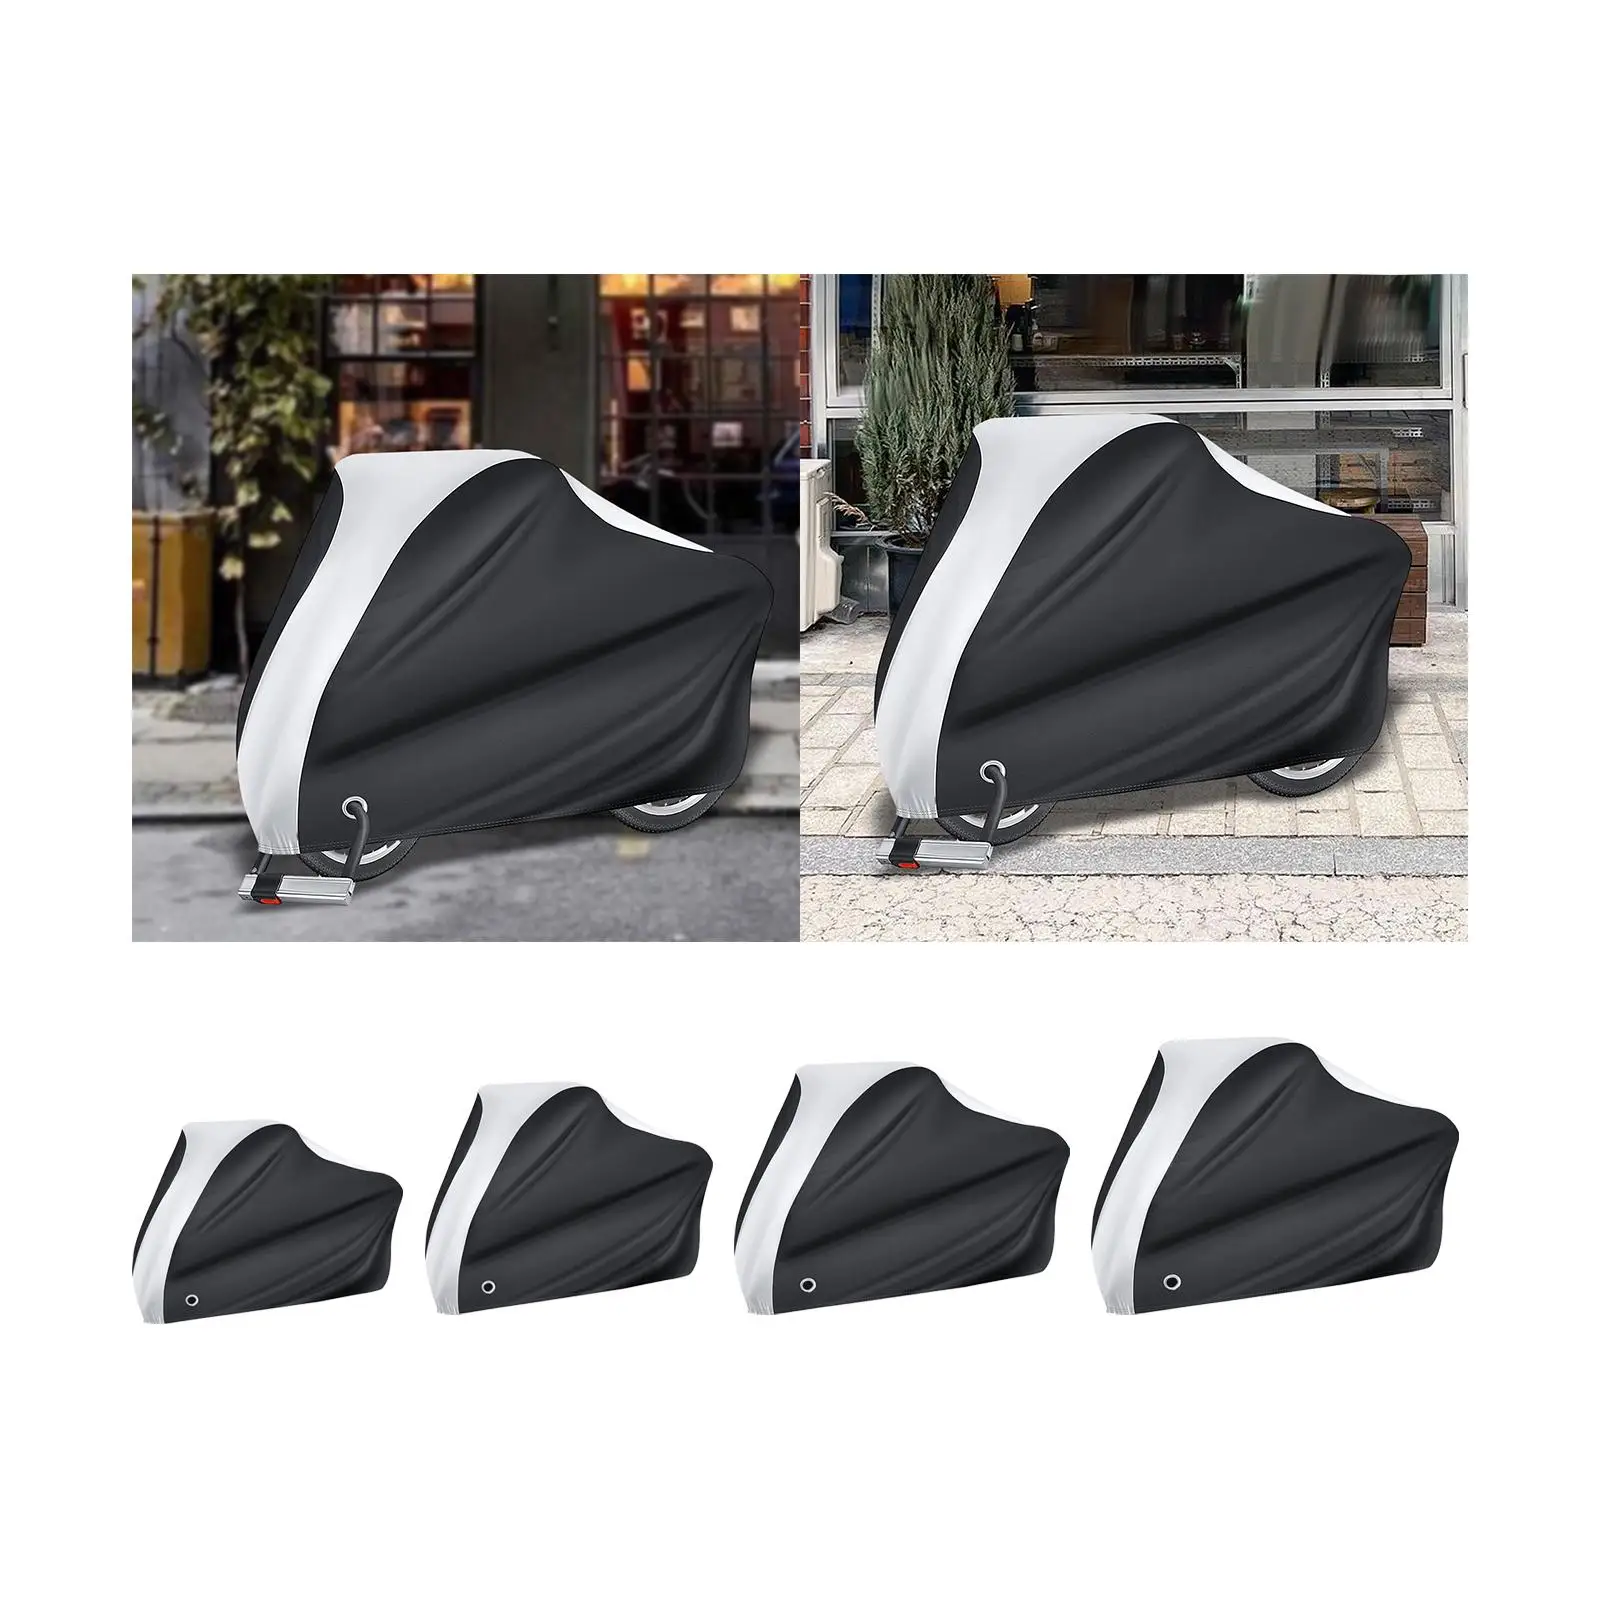 Bike Cover Tear Resistant Portable Protective with Lock Hole Bicycle Cover for